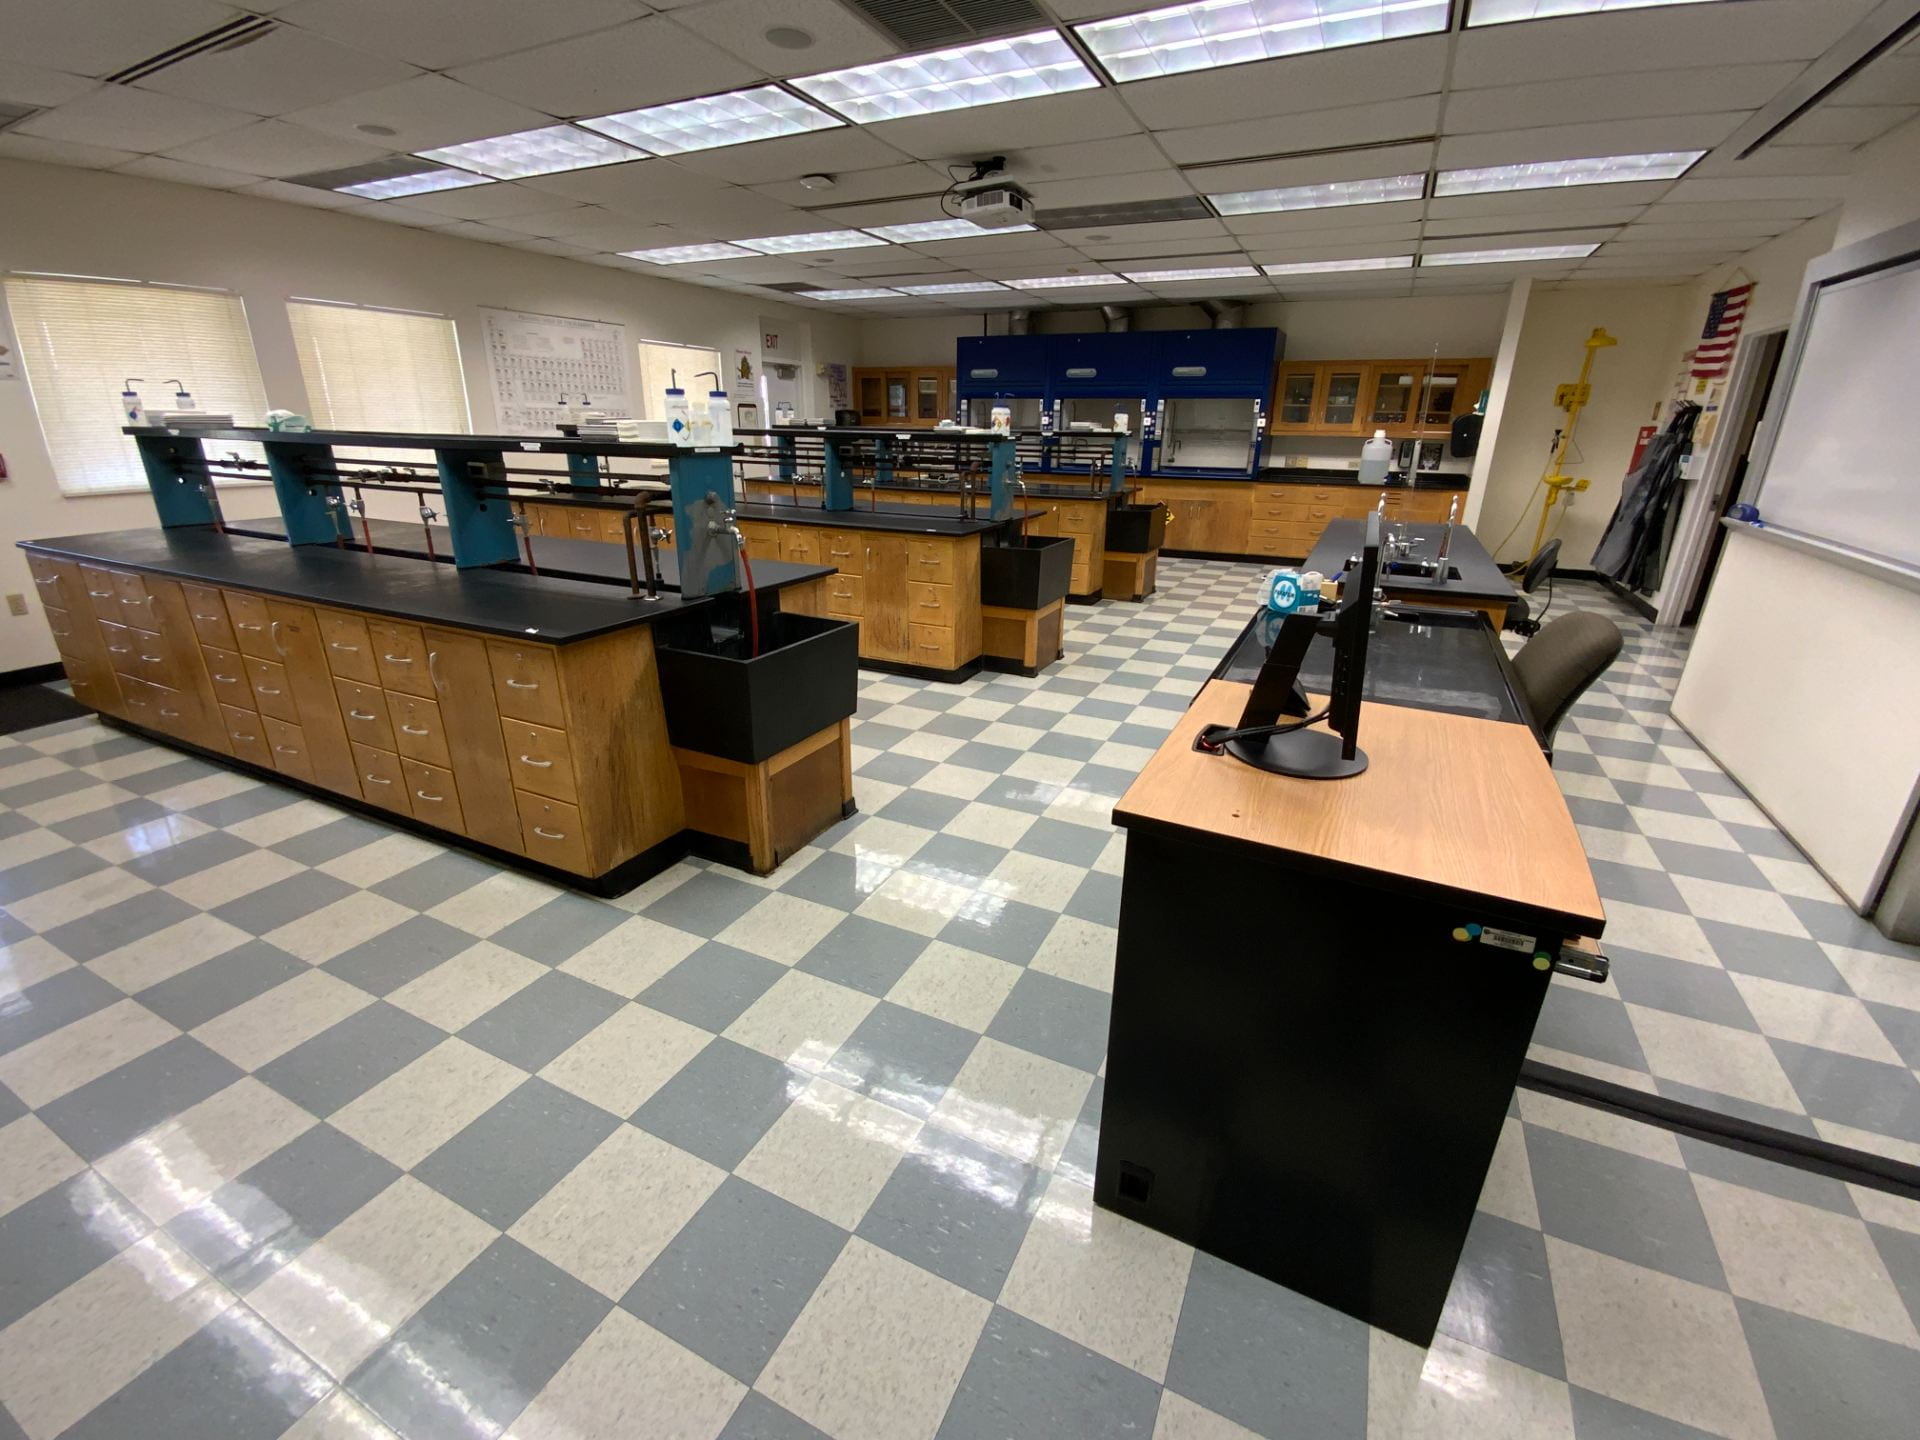 Image of North Campus Chemistry Lab building 57 room 207.